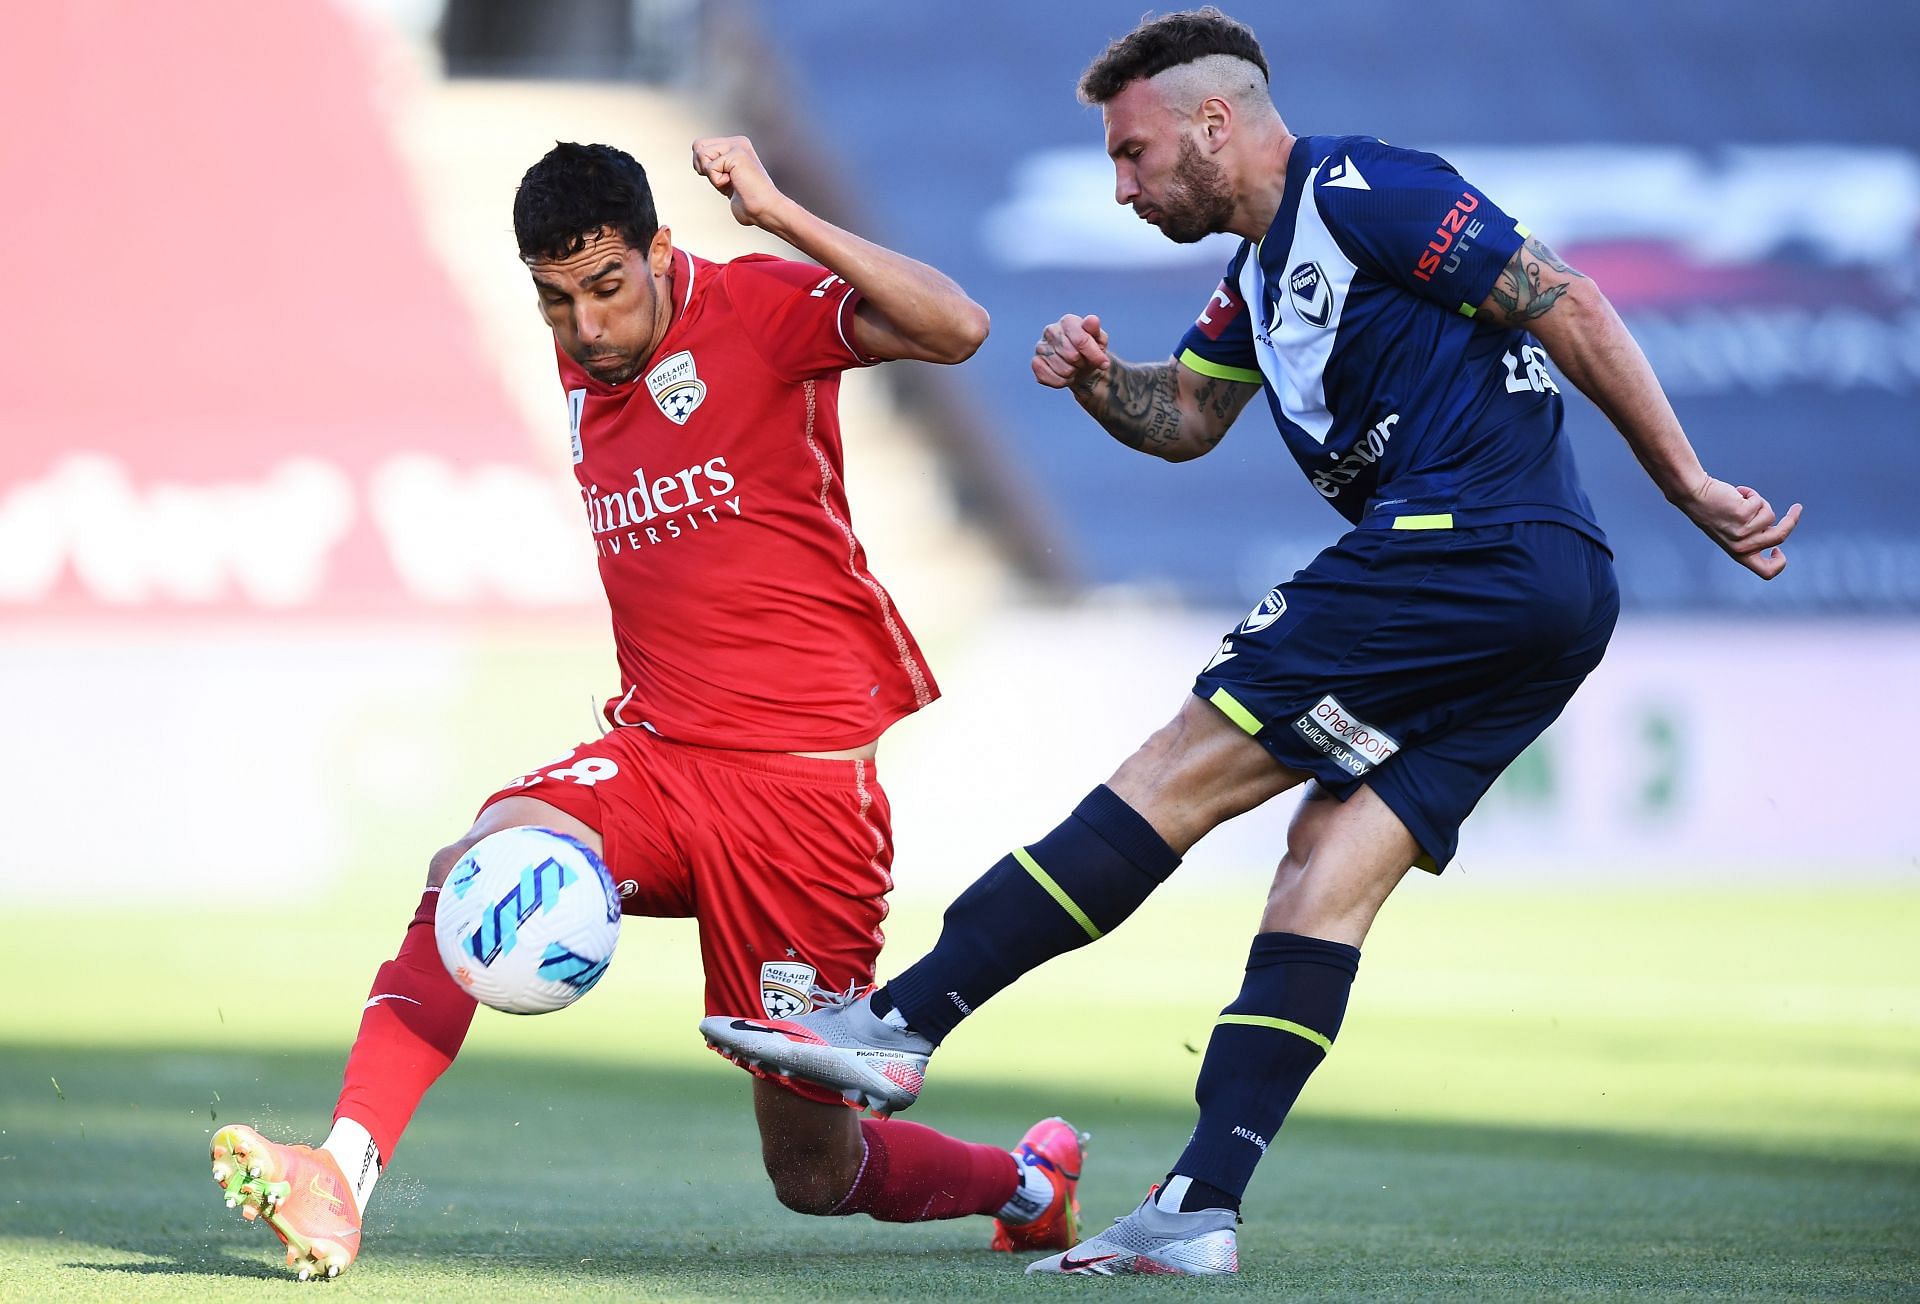 Melbourne Victory take on Adelaide United this weekend